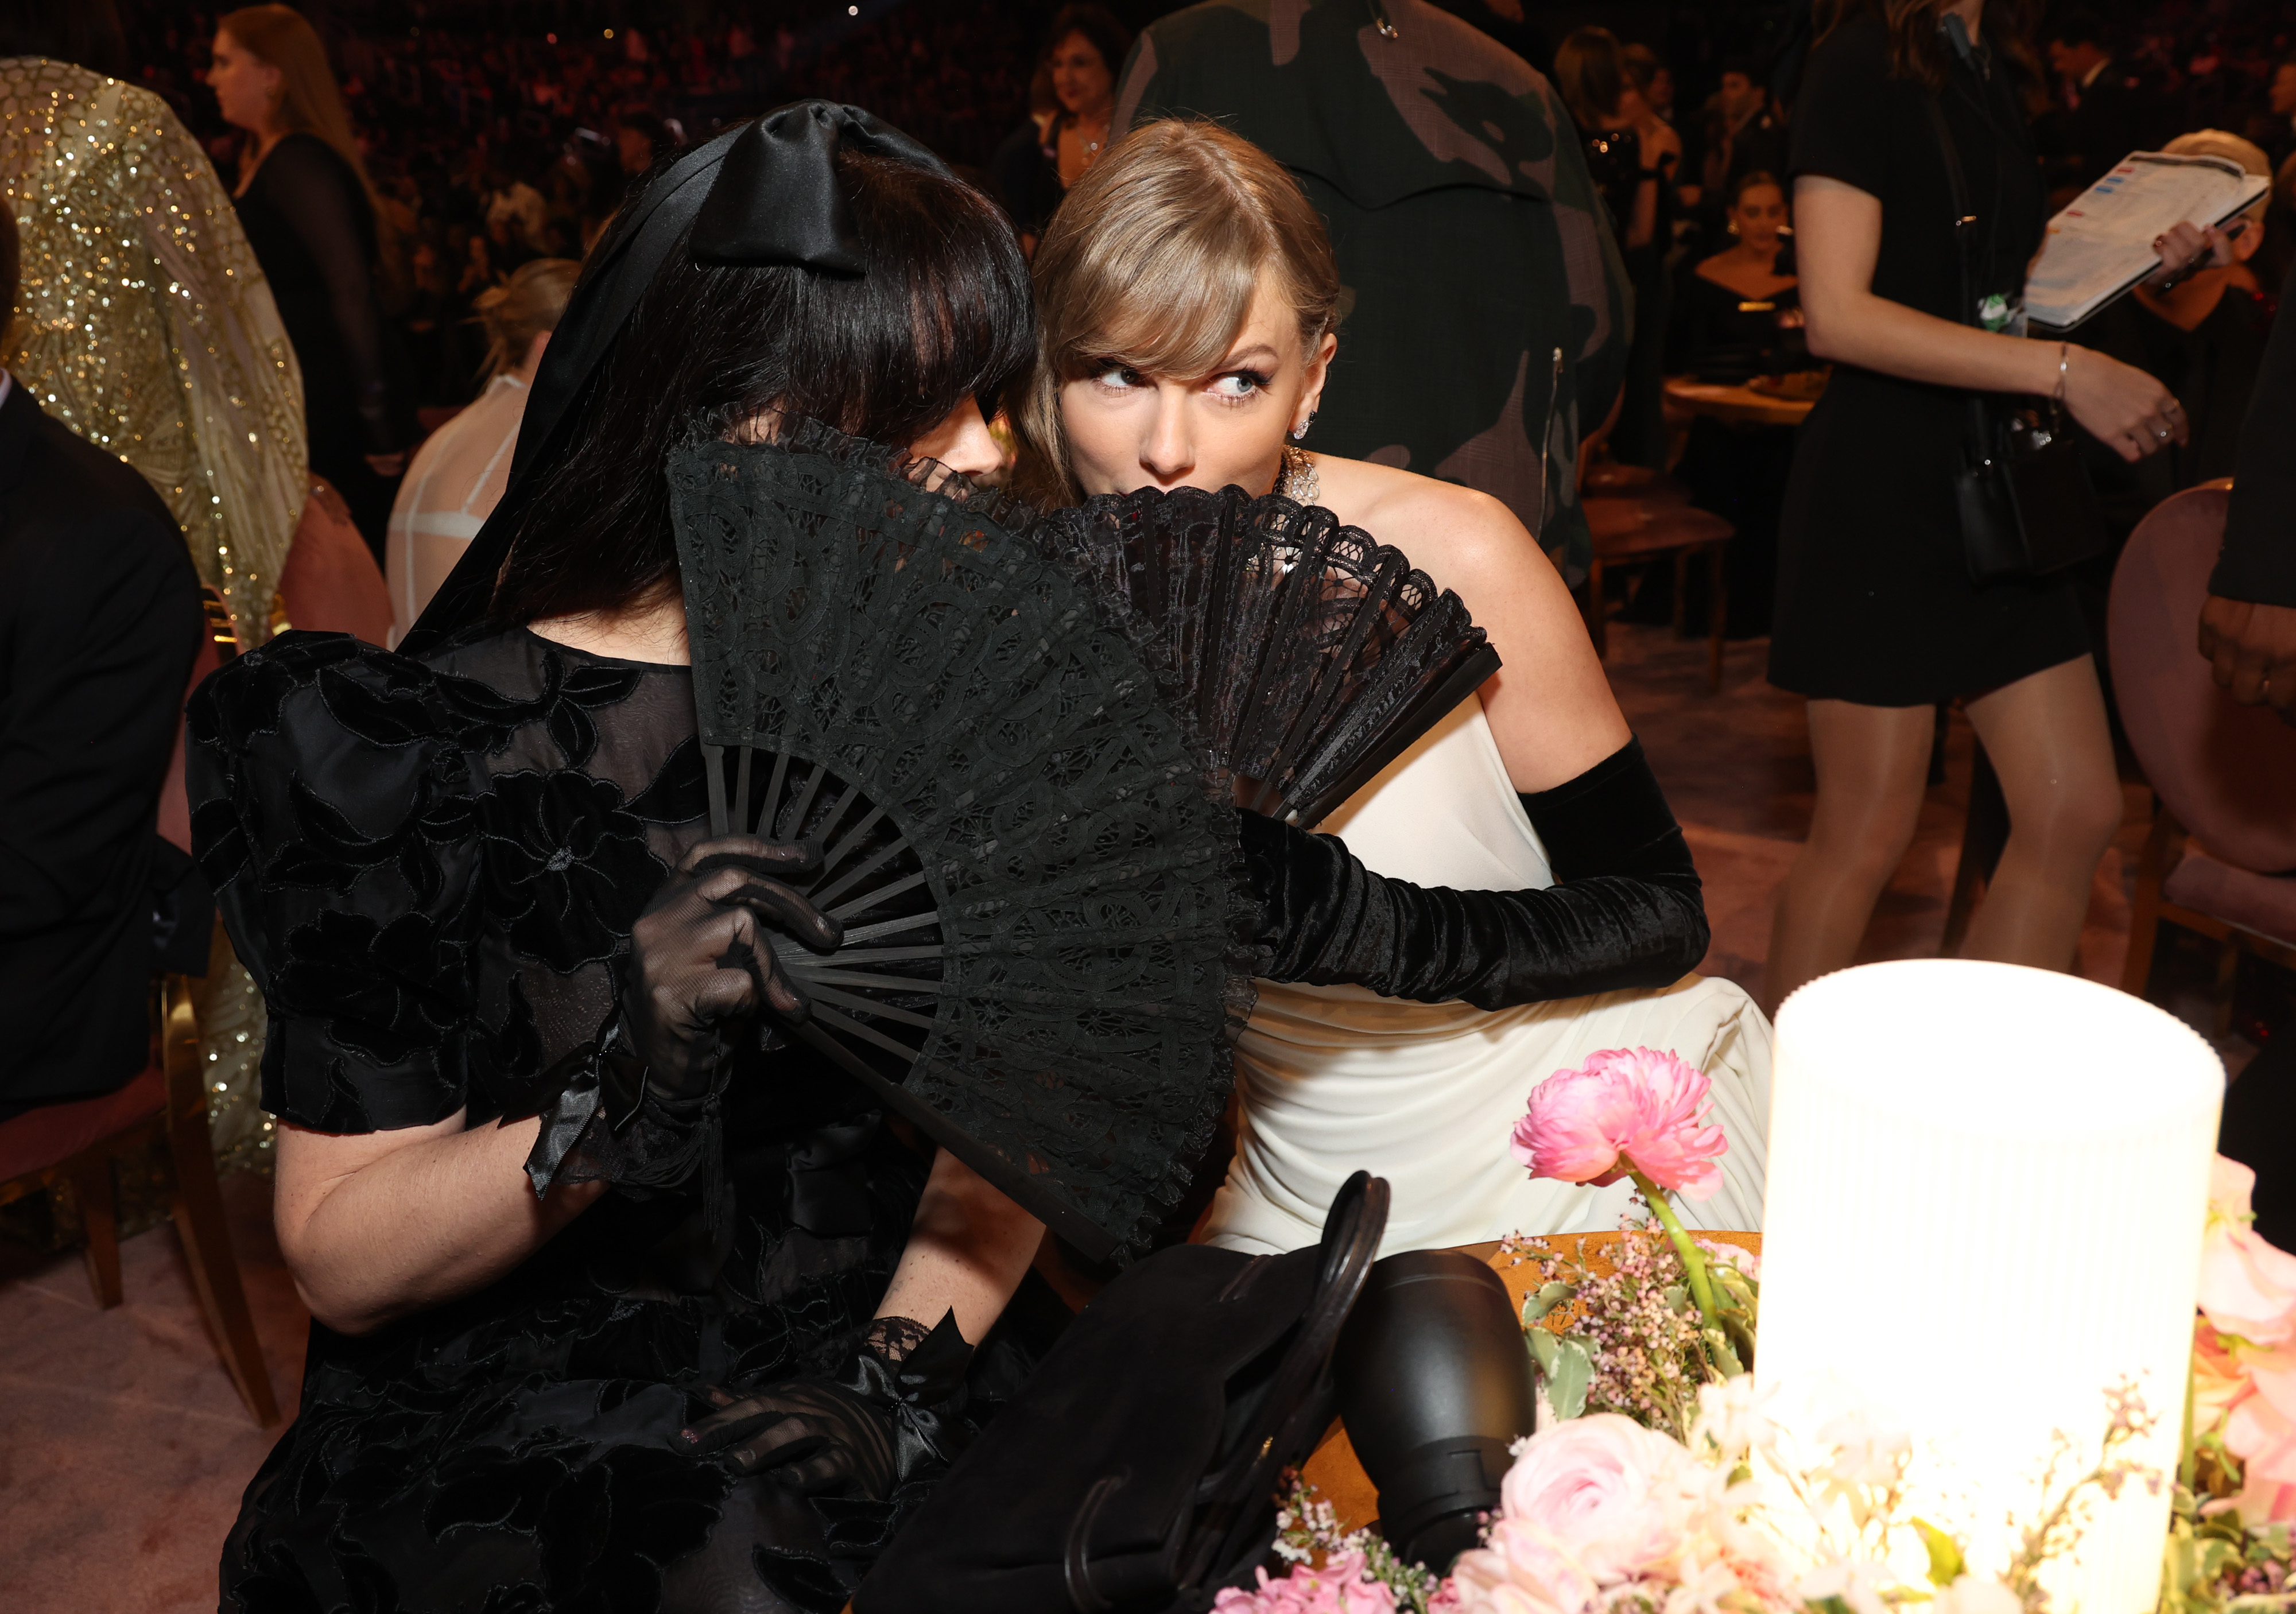 Close-up of Taylor and Lana sitting together behind an open fan